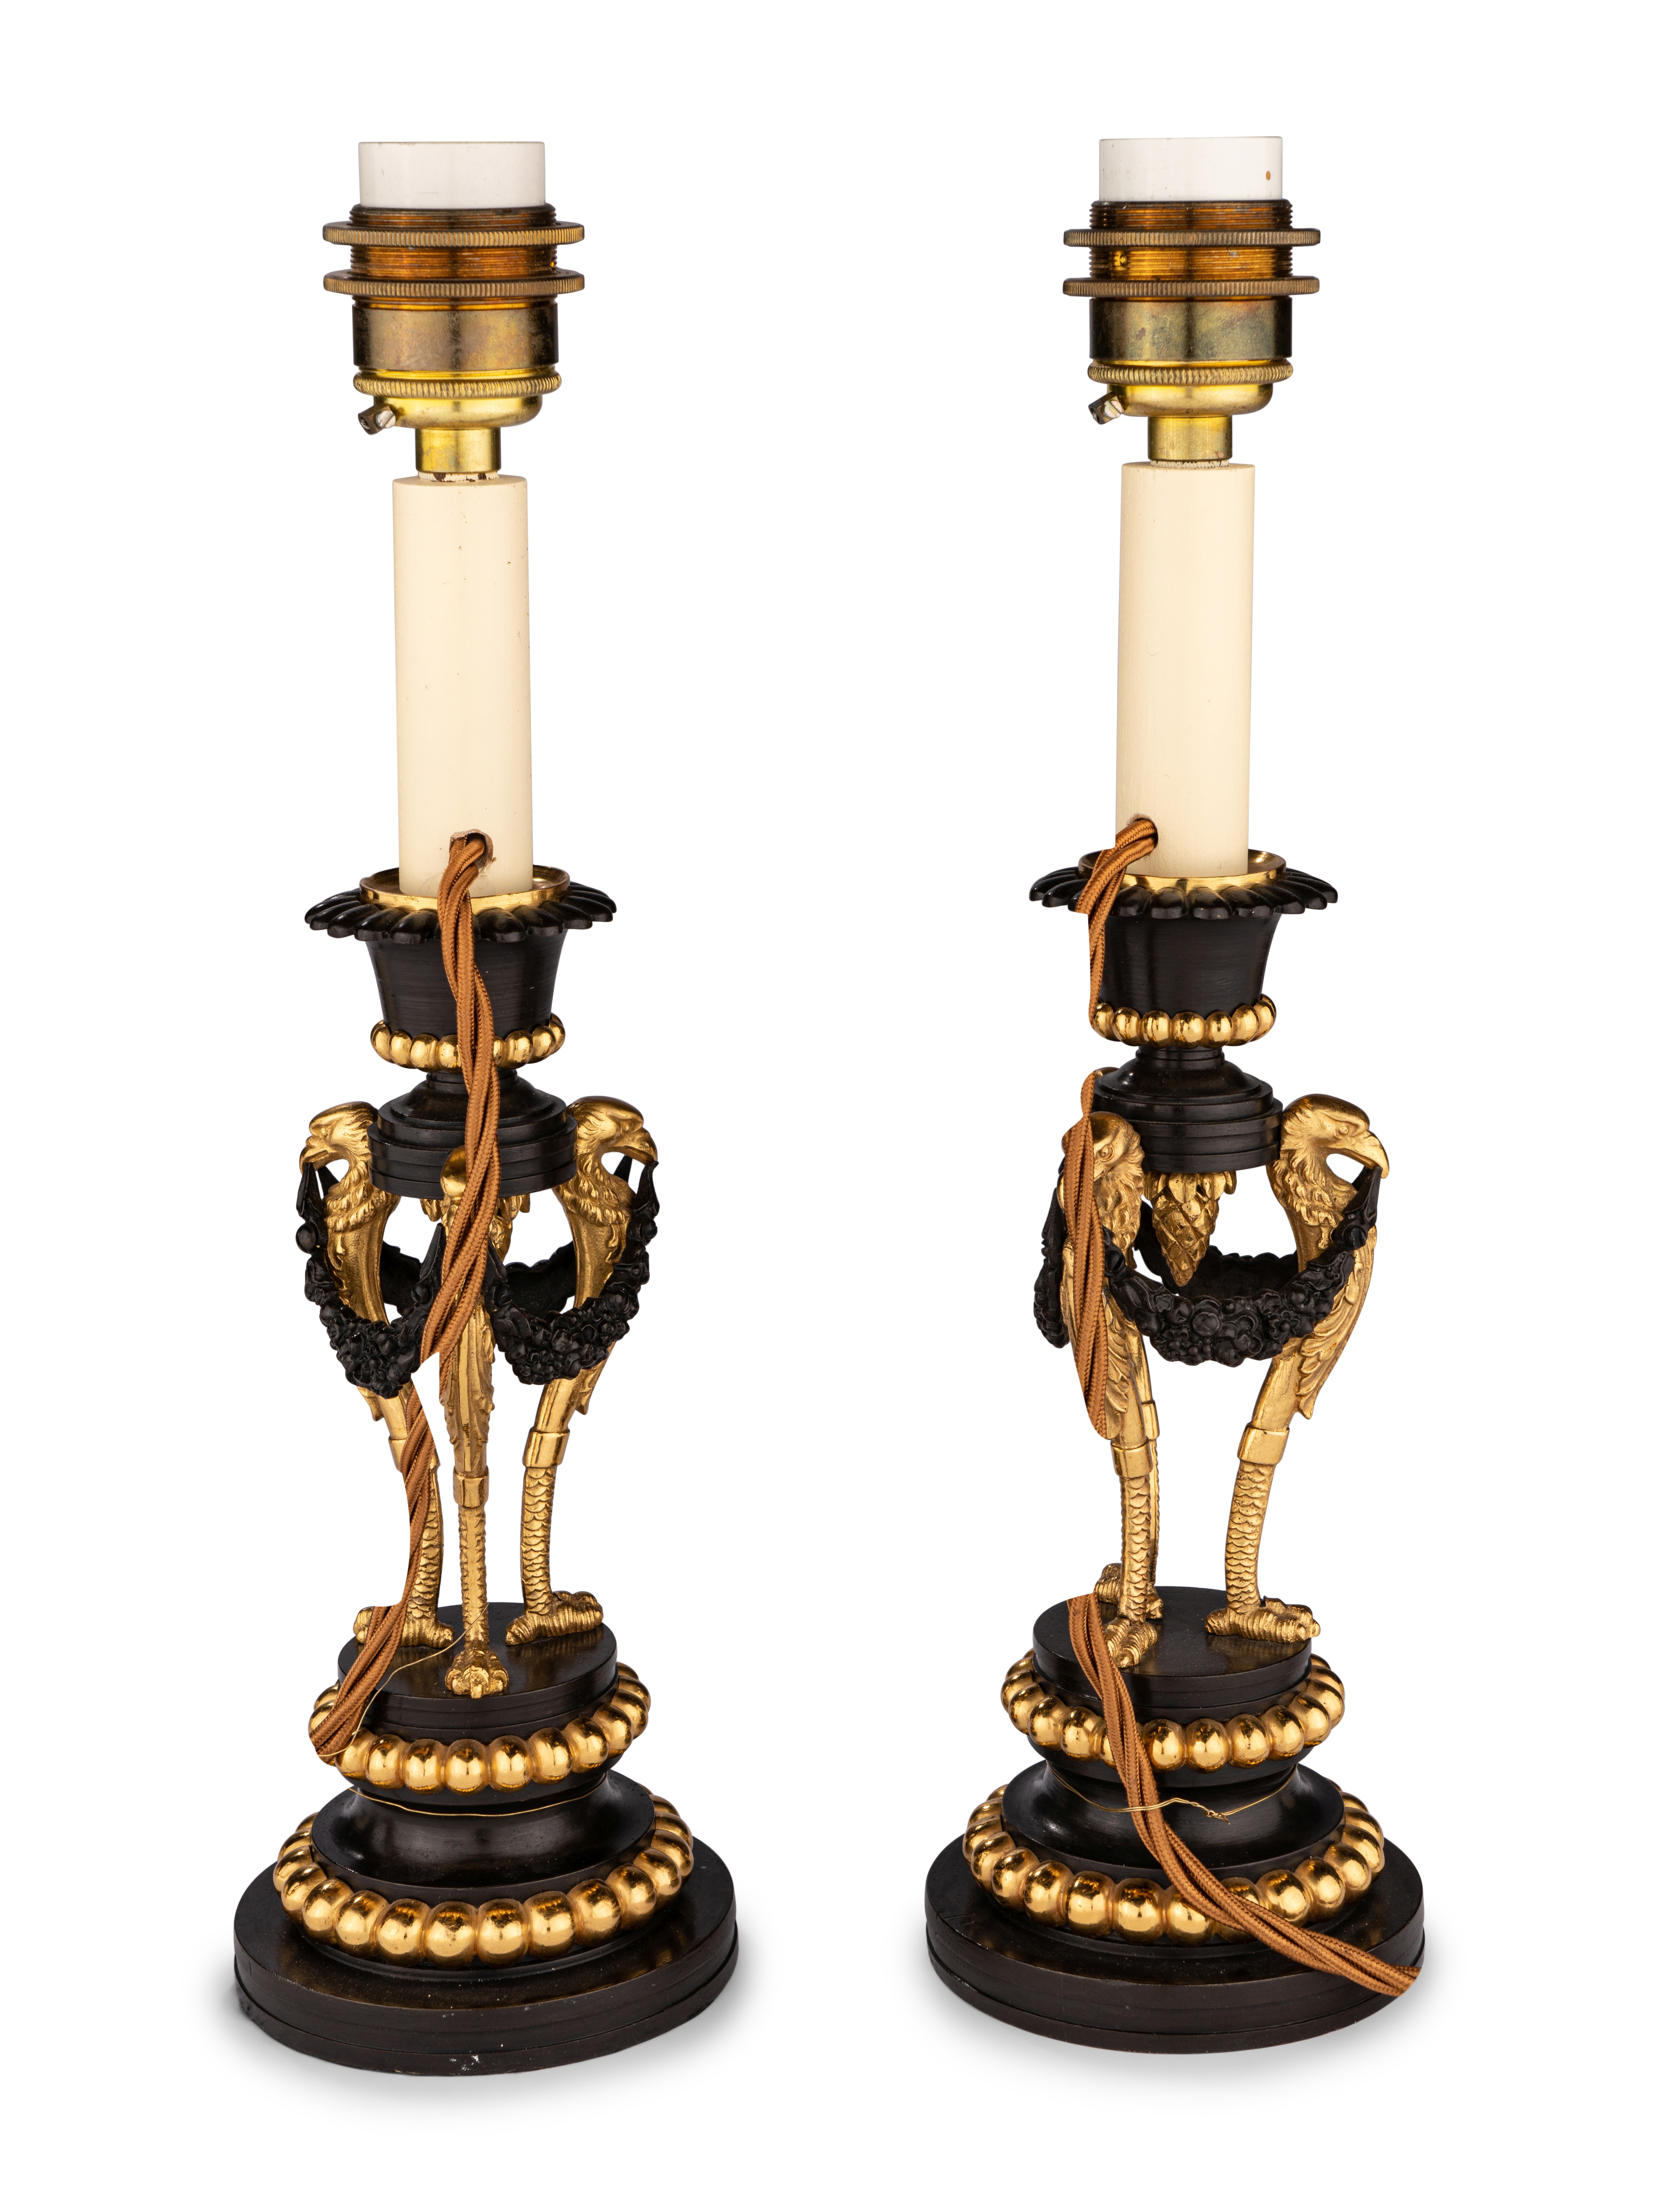 A Pair of Directoire Parcel-Gilt Bronze Candlesticks - Image 4 of 7